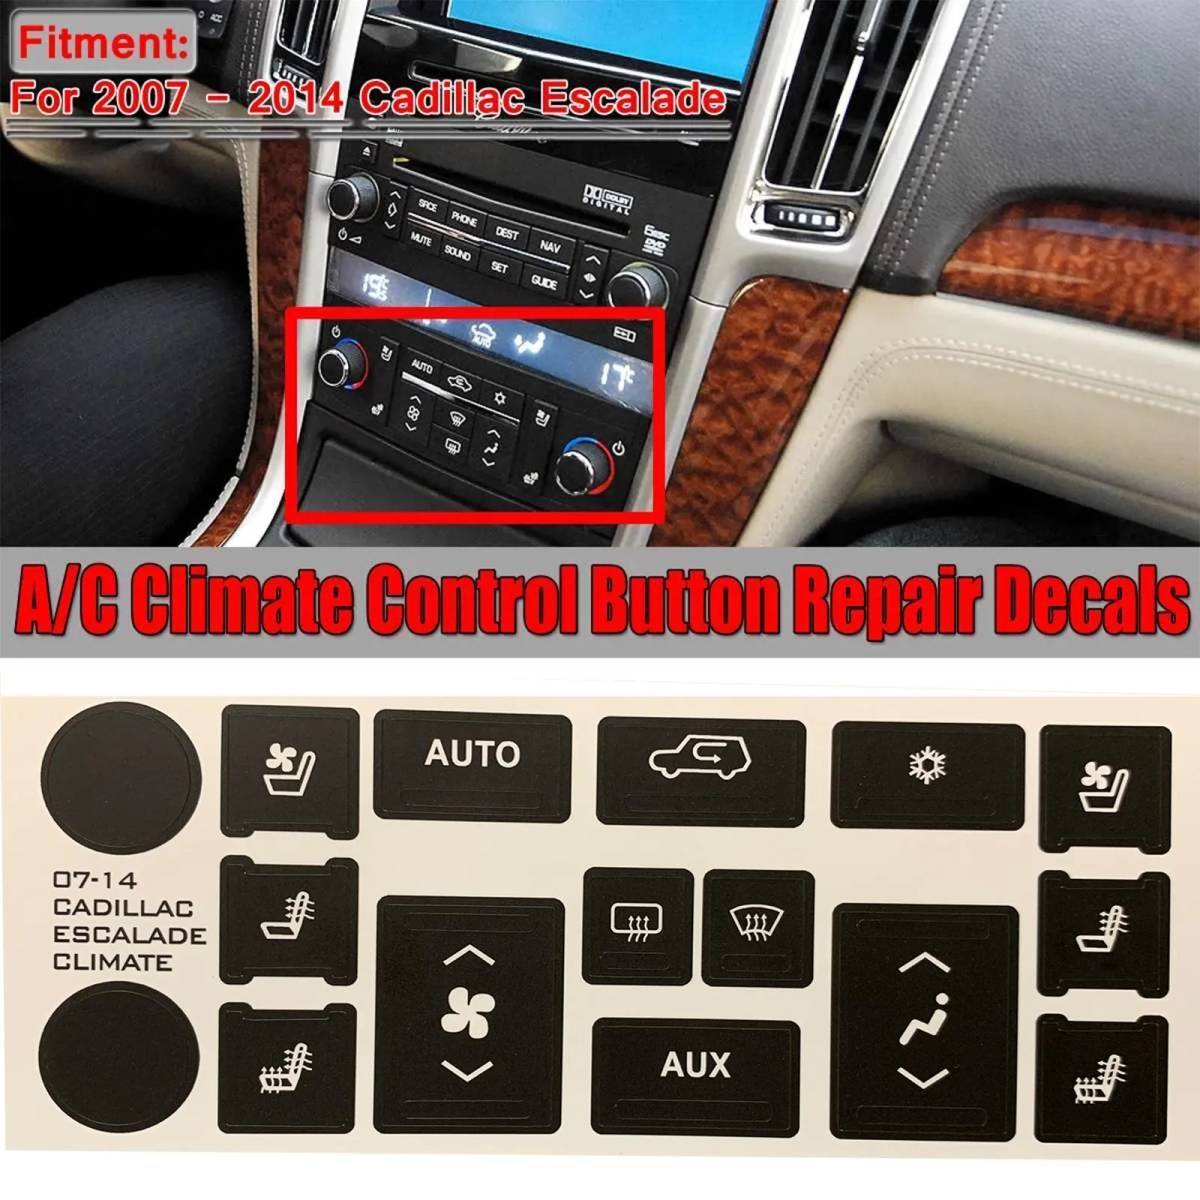  new car air conditioner A/C climate control switch button repair decal sticker Cadillac Escalade 2007 2008 2009 2010-2014